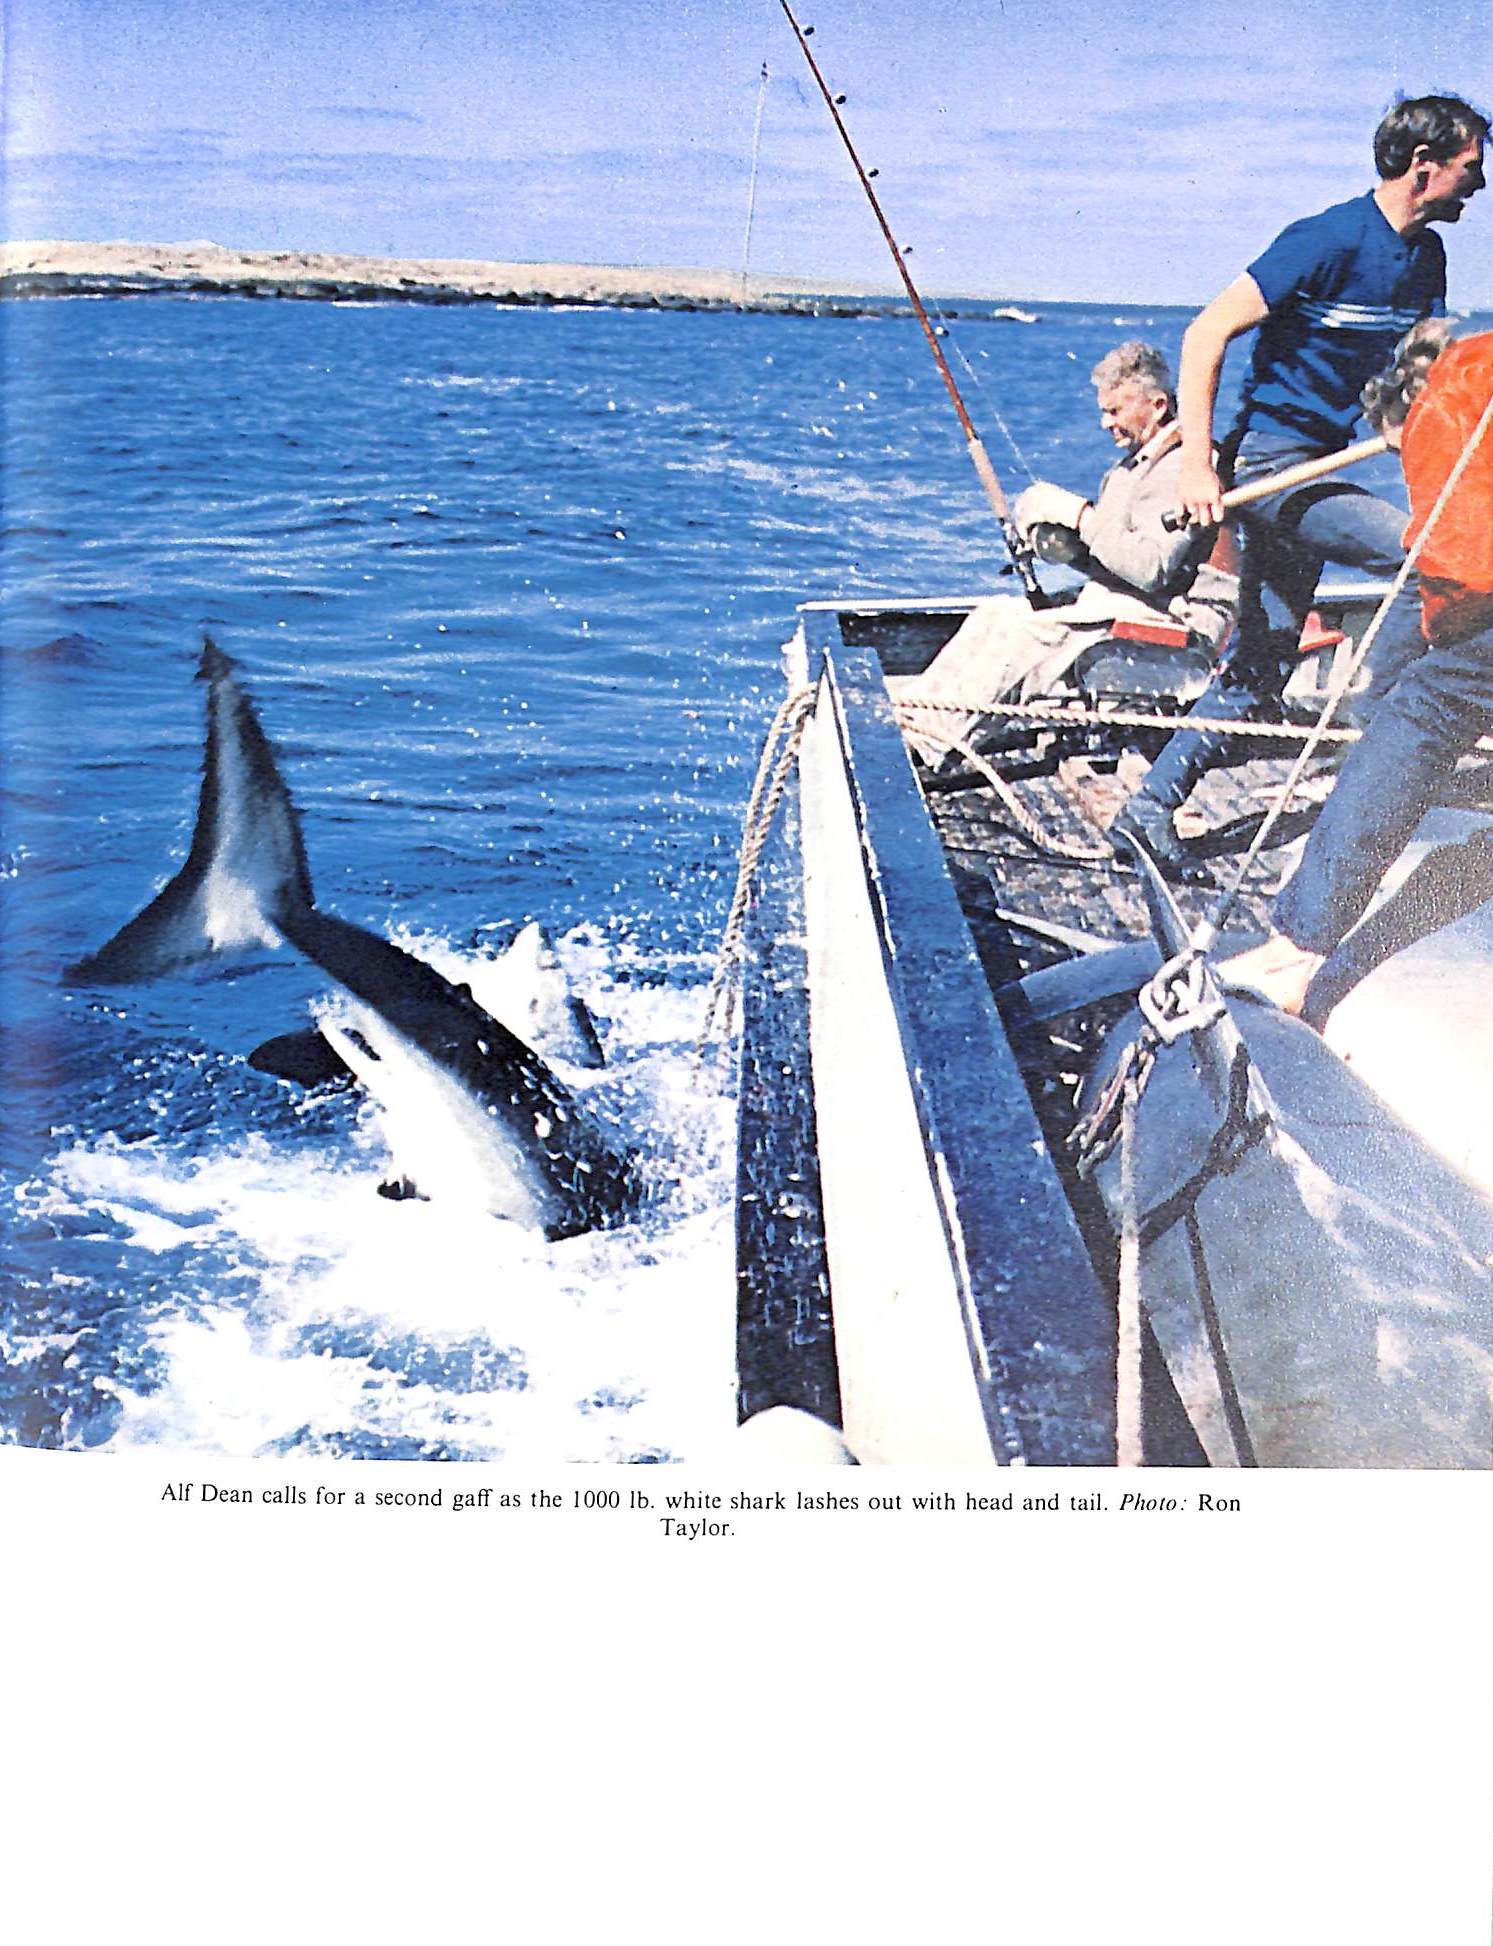 BIG FISH AND Blue Water Pacific Gamefishing Peter Goadby 1970 Vintage Book  AD980 $31.24 - PicClick AU